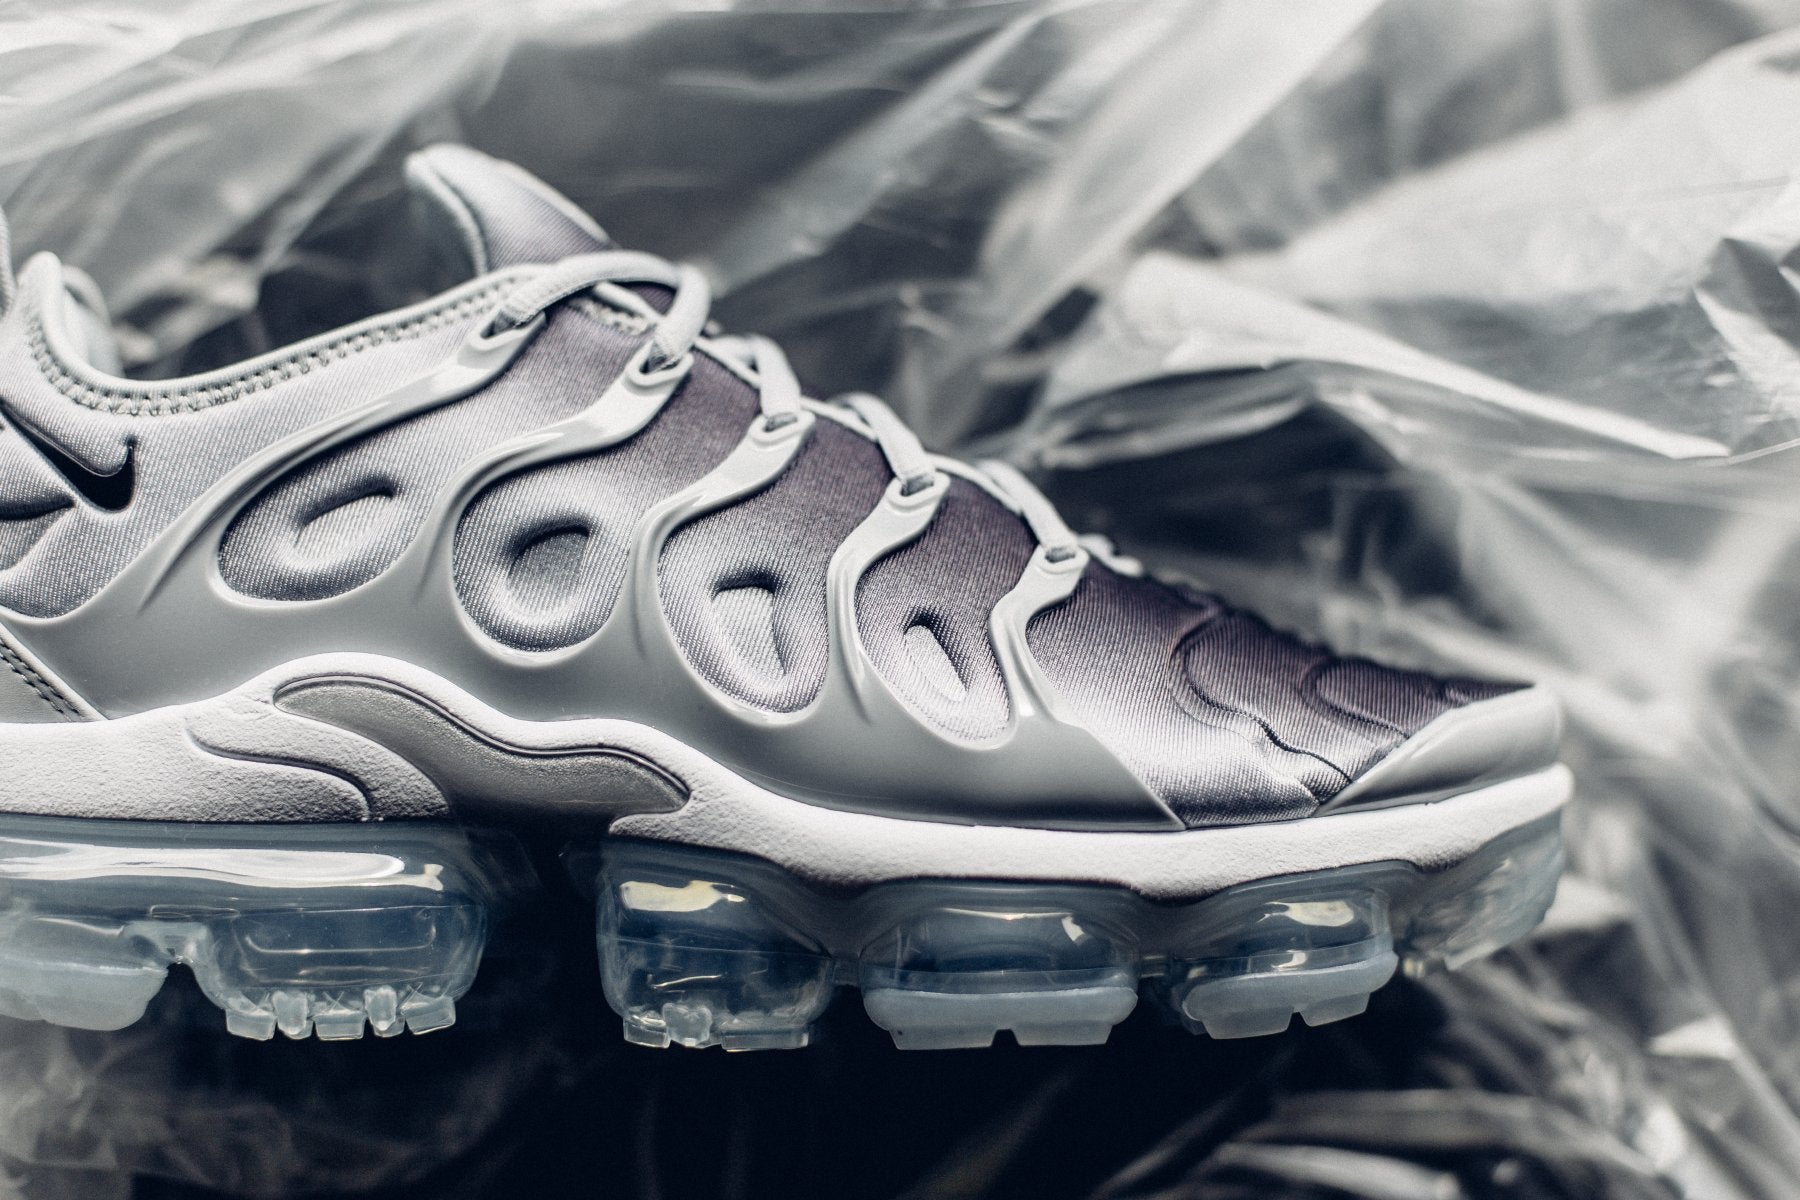 grey and white vapormax plus